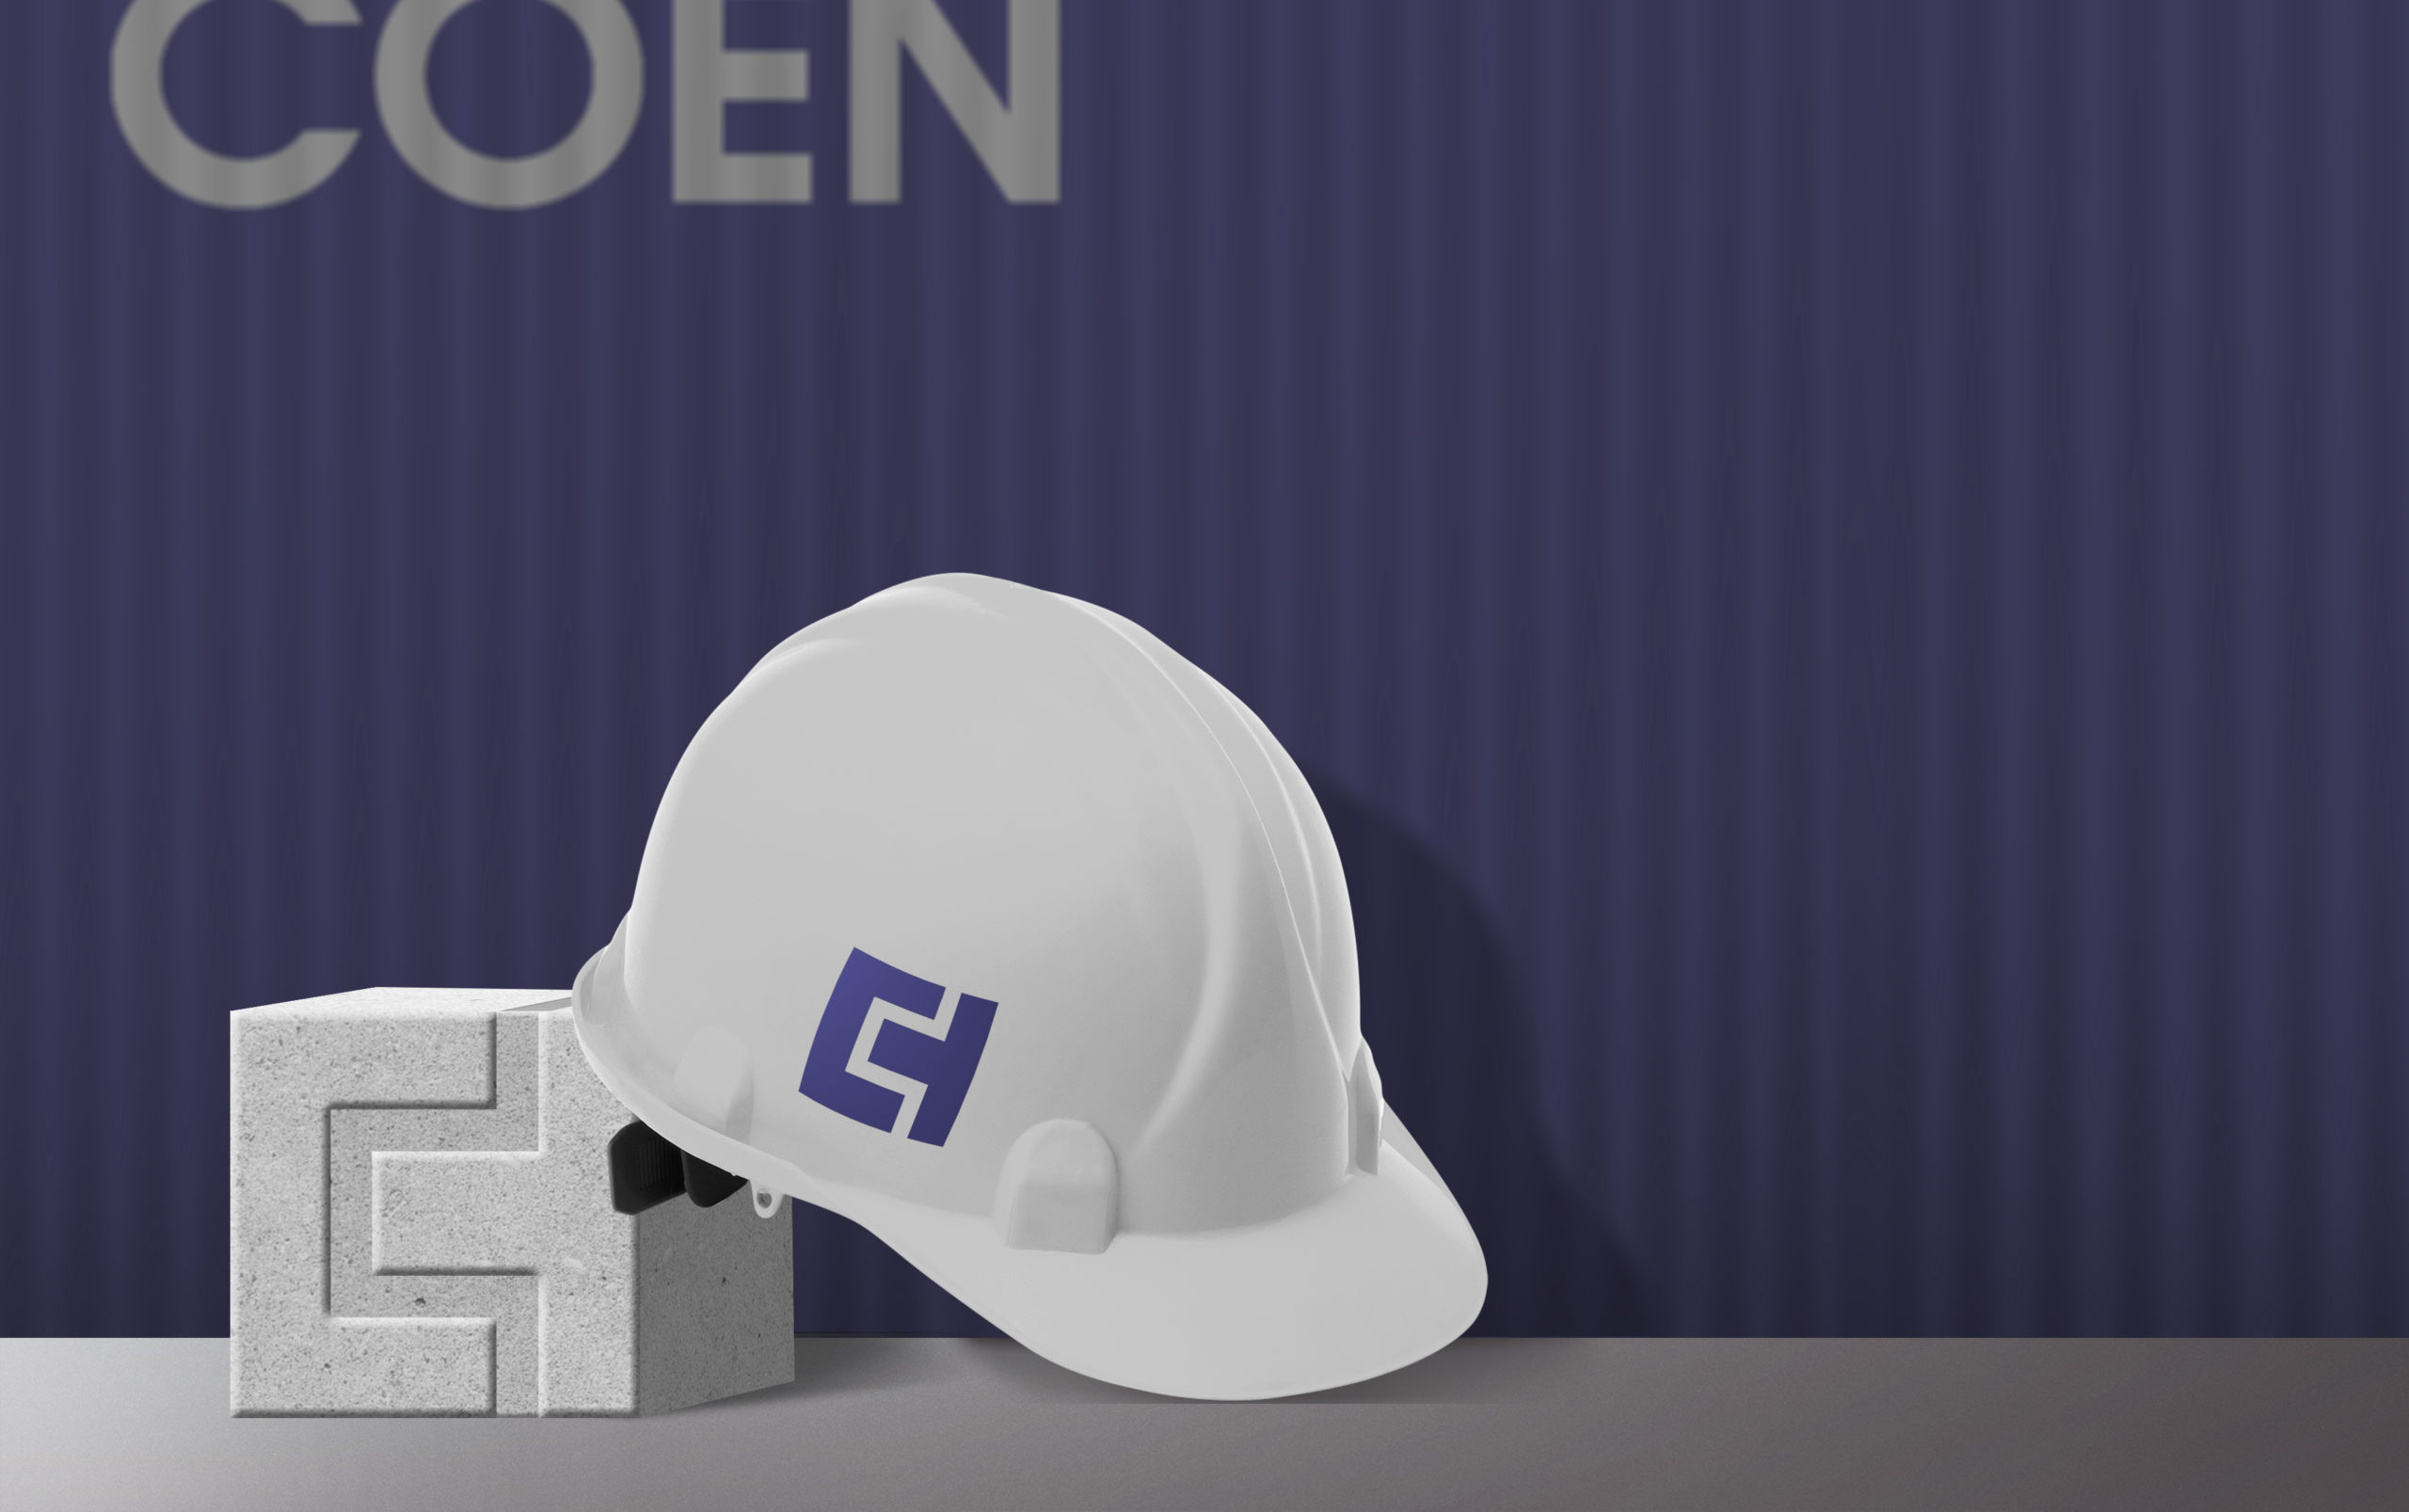 Coen Construction and engineering